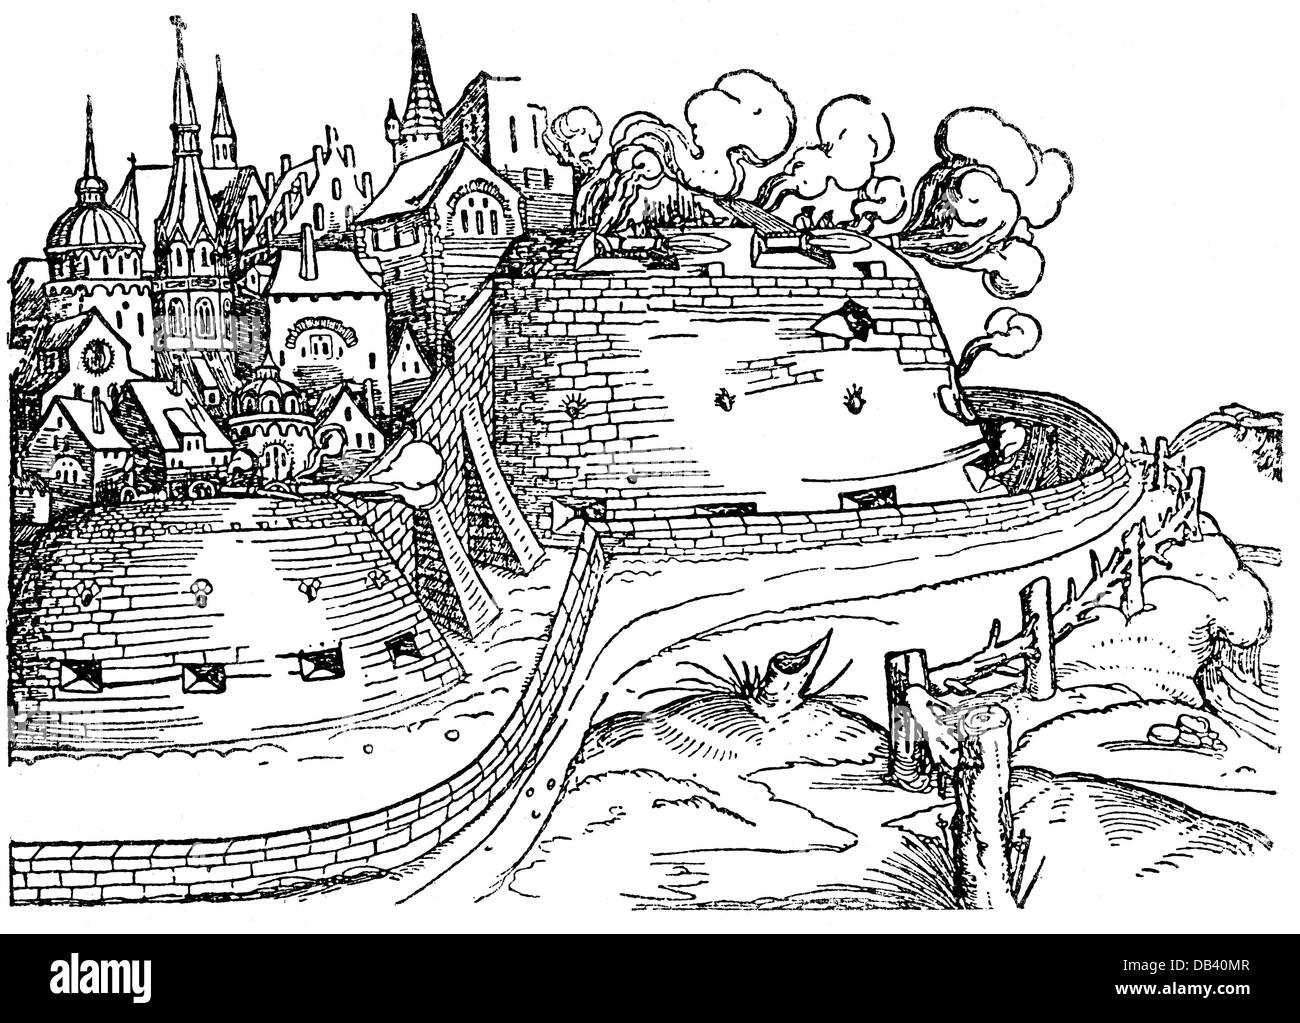 military, fortresses, defence of a fortified town, woodcut, circa 16th century, city, fortress, fortresses, military, siege, sieges, artillery, shooting, shoot, shot, firing, fire, defend, defending, historic, historical, Additional-Rights-Clearences-Not Available Stock Photo